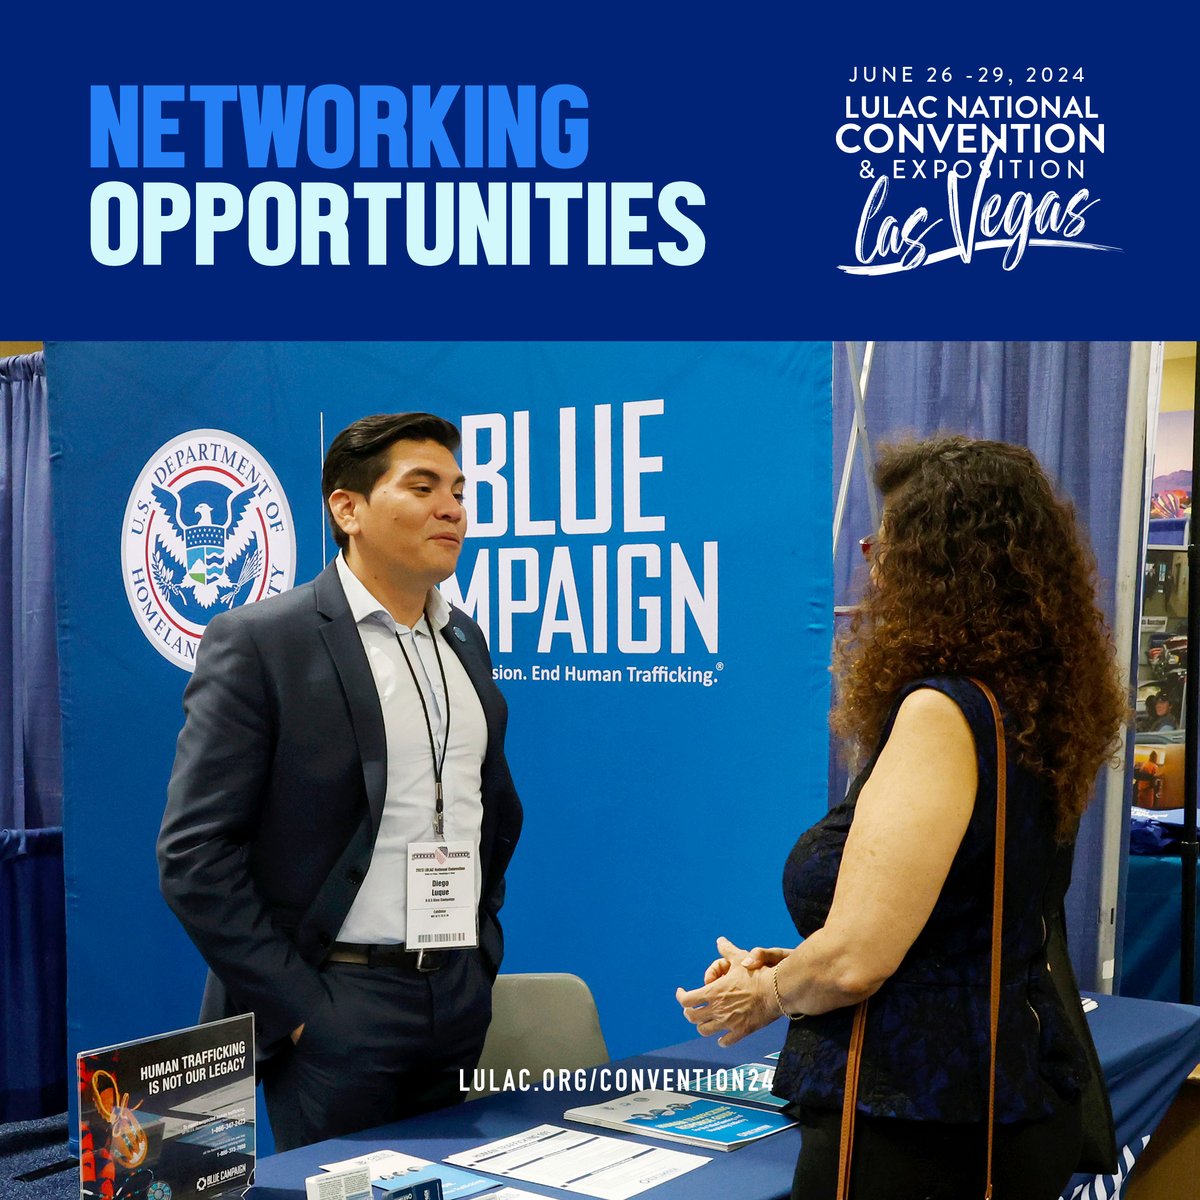 🌟 Join the LULAC National Convention for top networking and career fair opportunities! 🚀

Register now:  lulac.org/convention24

#LULAC2024 #Networking #CareerFair